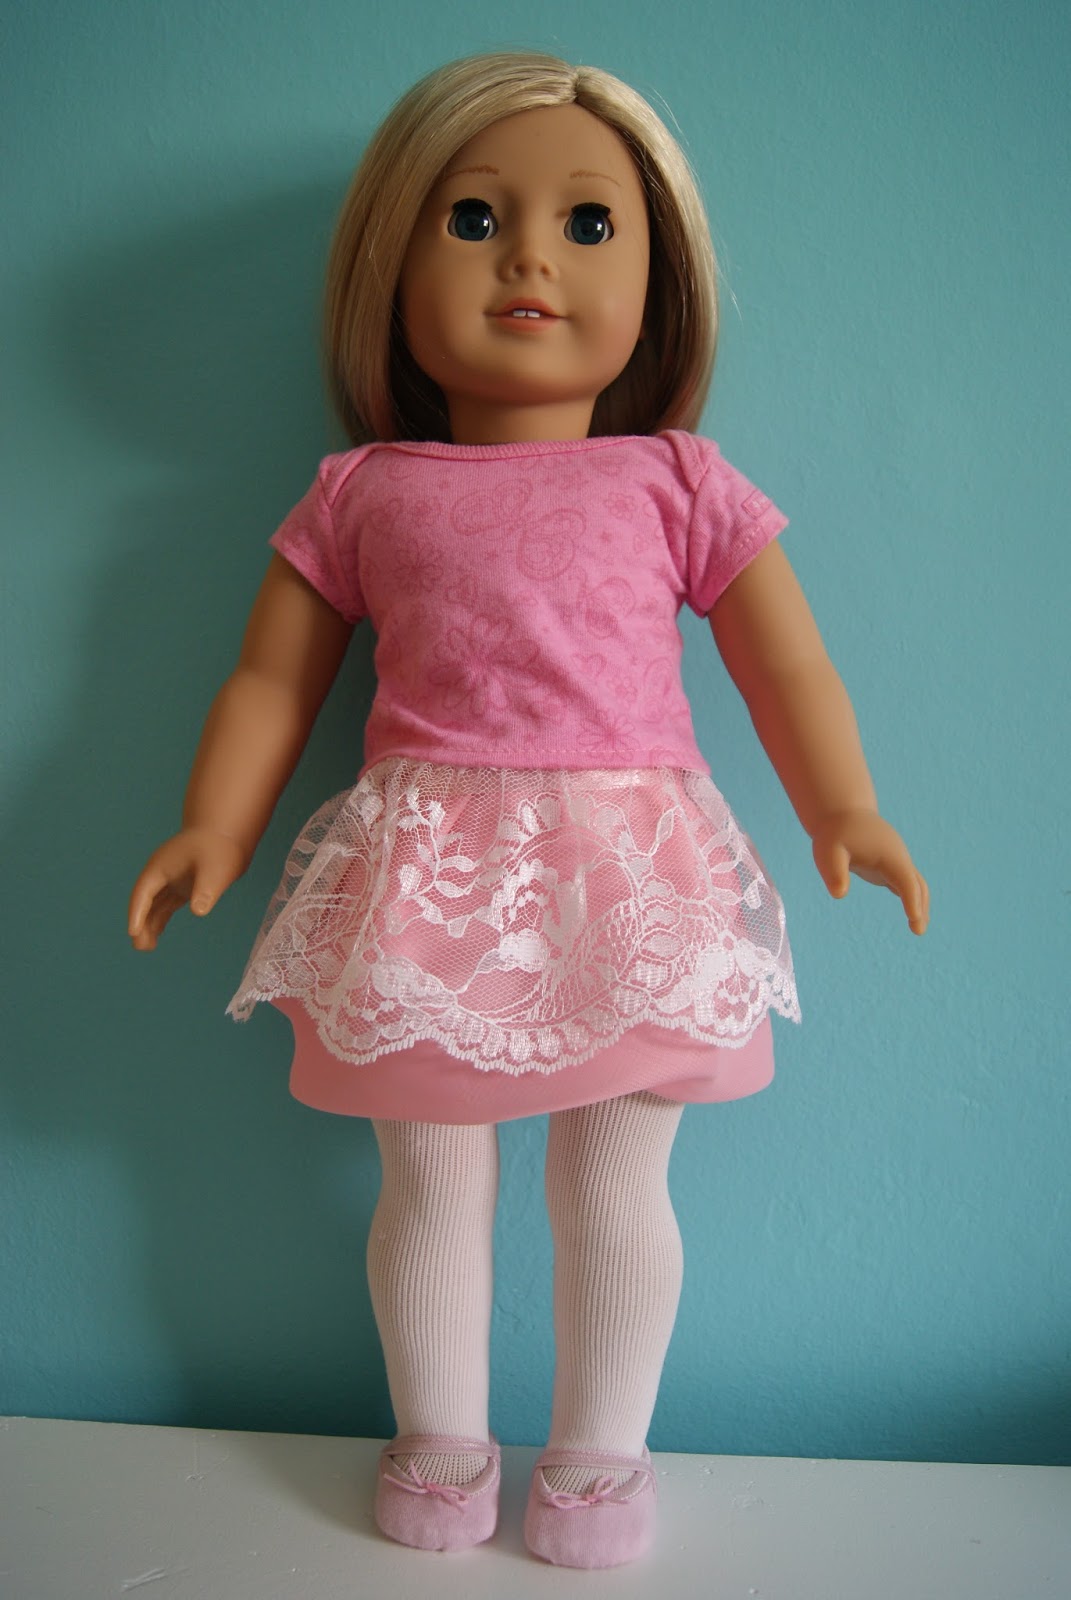 lace skirt on top of pink chiffon bubble skirt for 18-inch doll by nest full of eggs